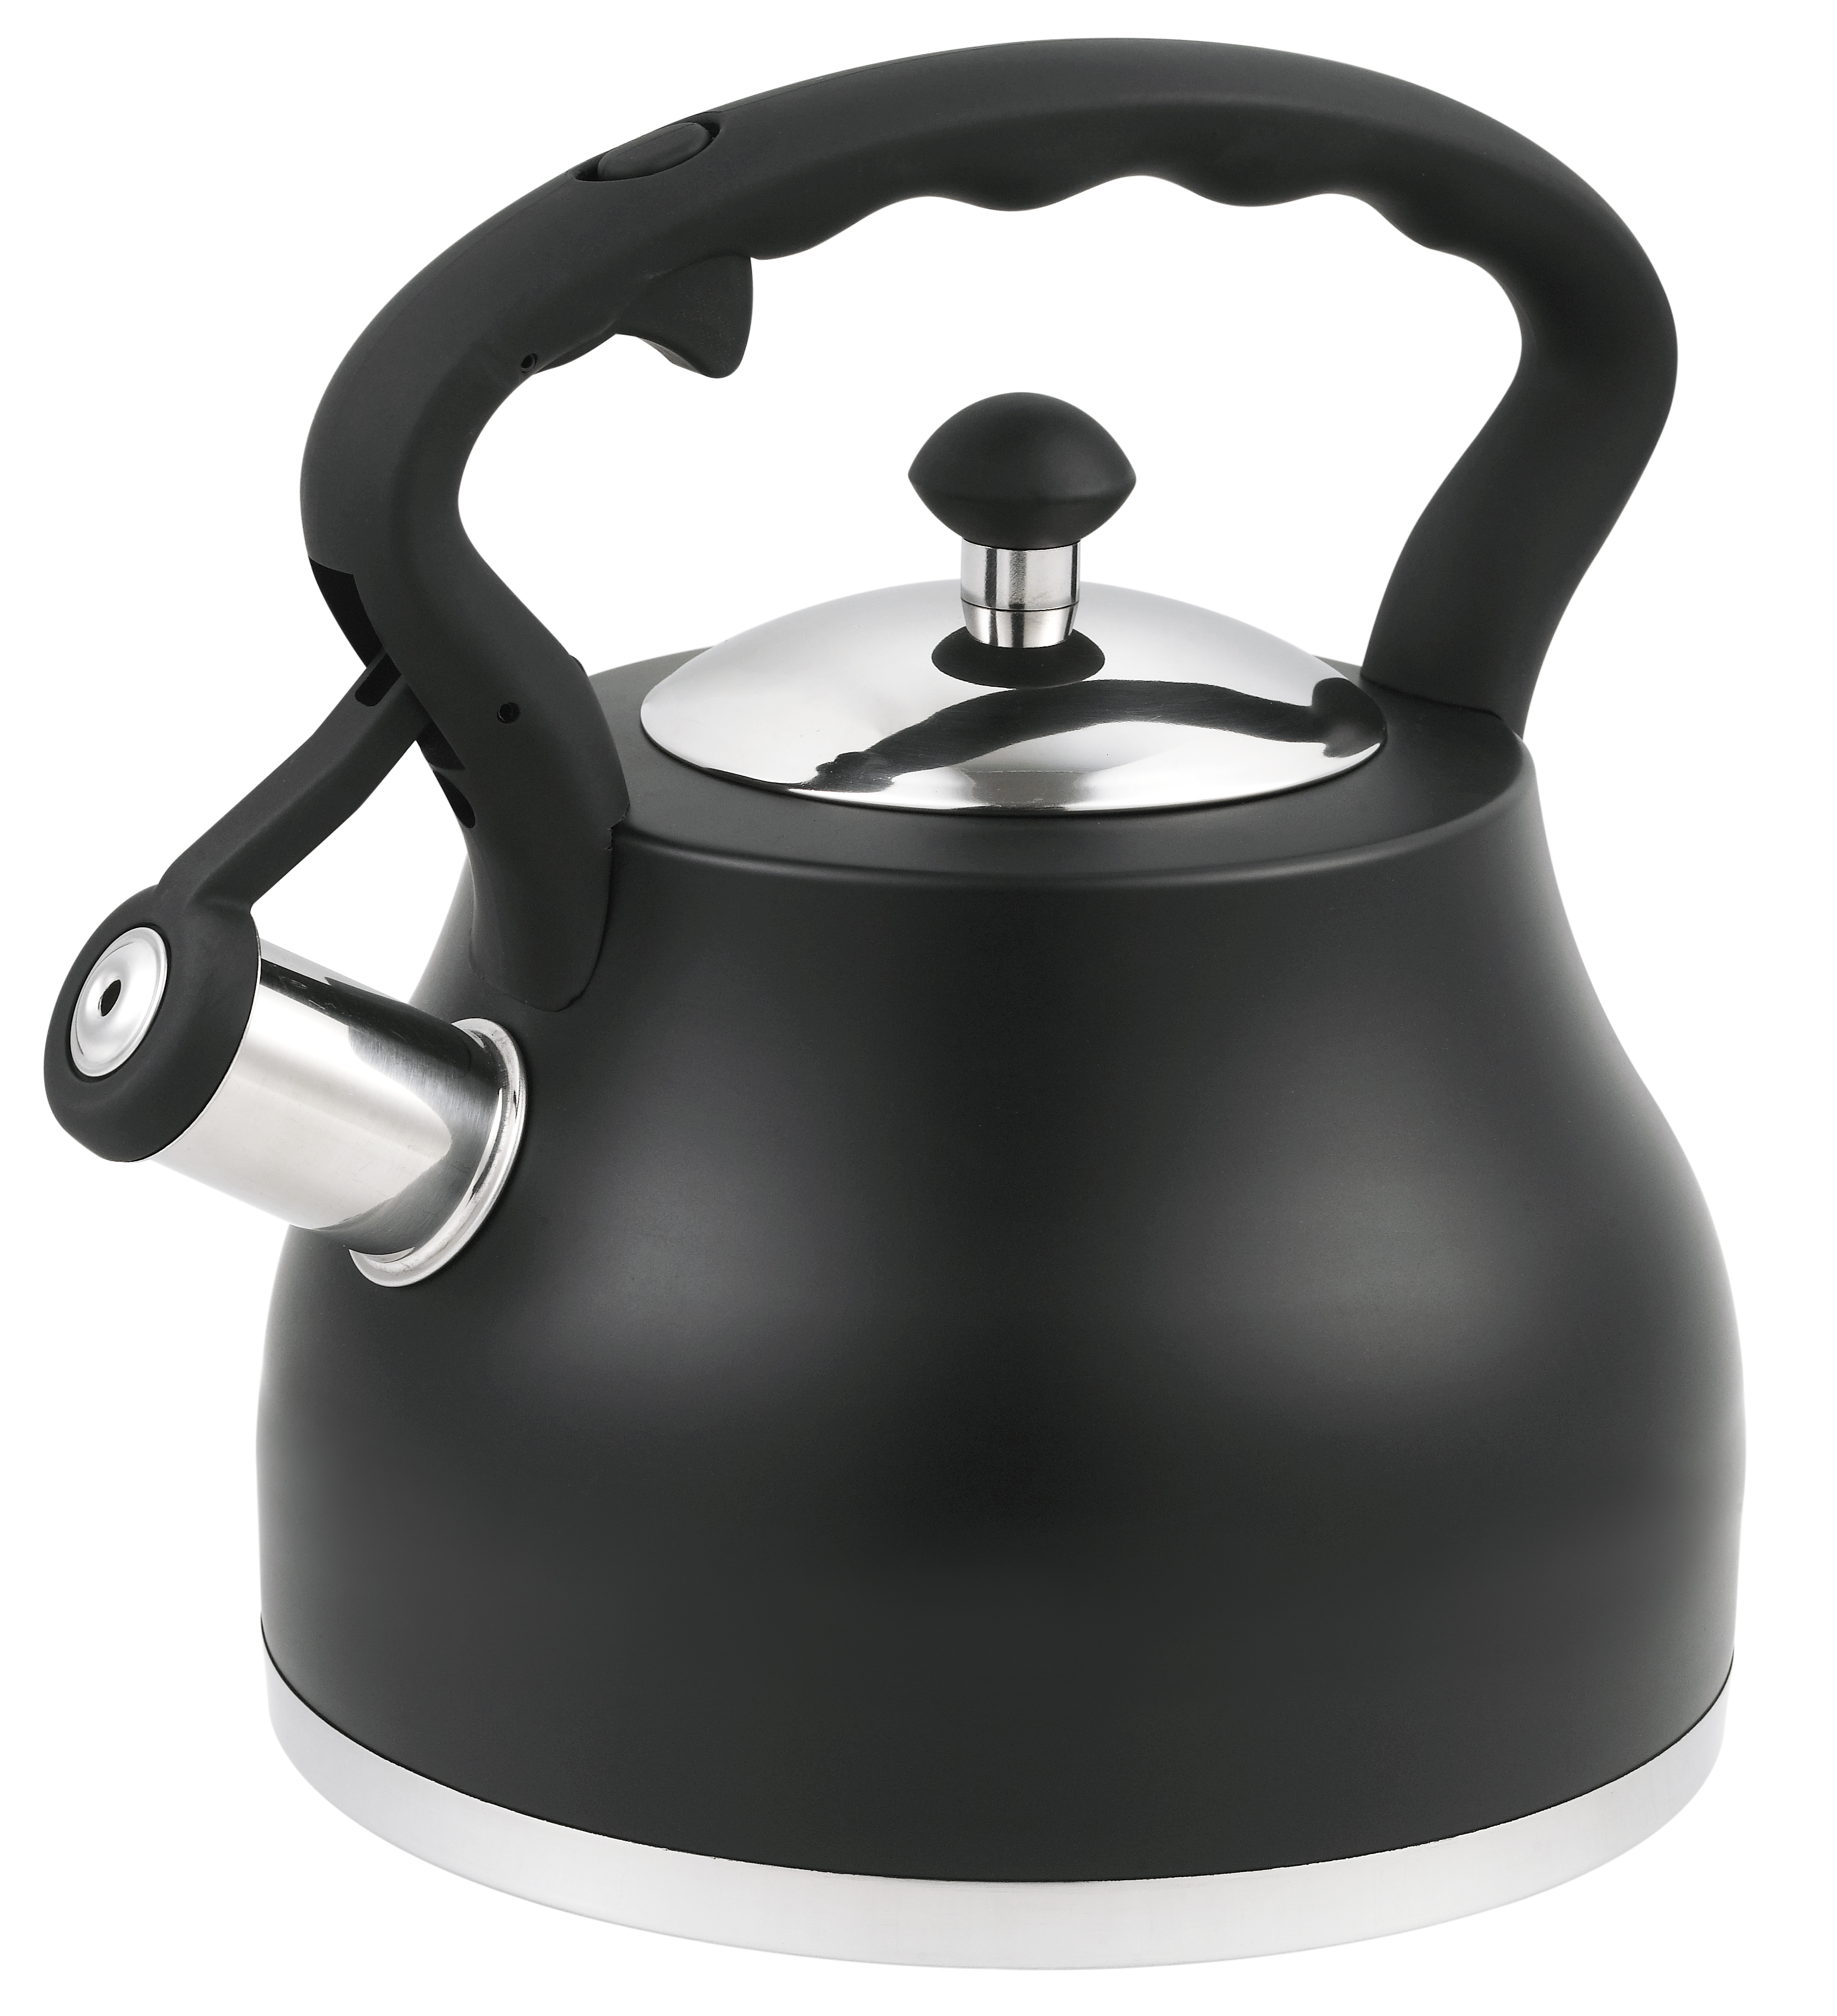 Anti-slip Handle Whistling Kettle for Tea Or Coffee 3L Food Grade Stainless Steel Whistling Kettle with Lid